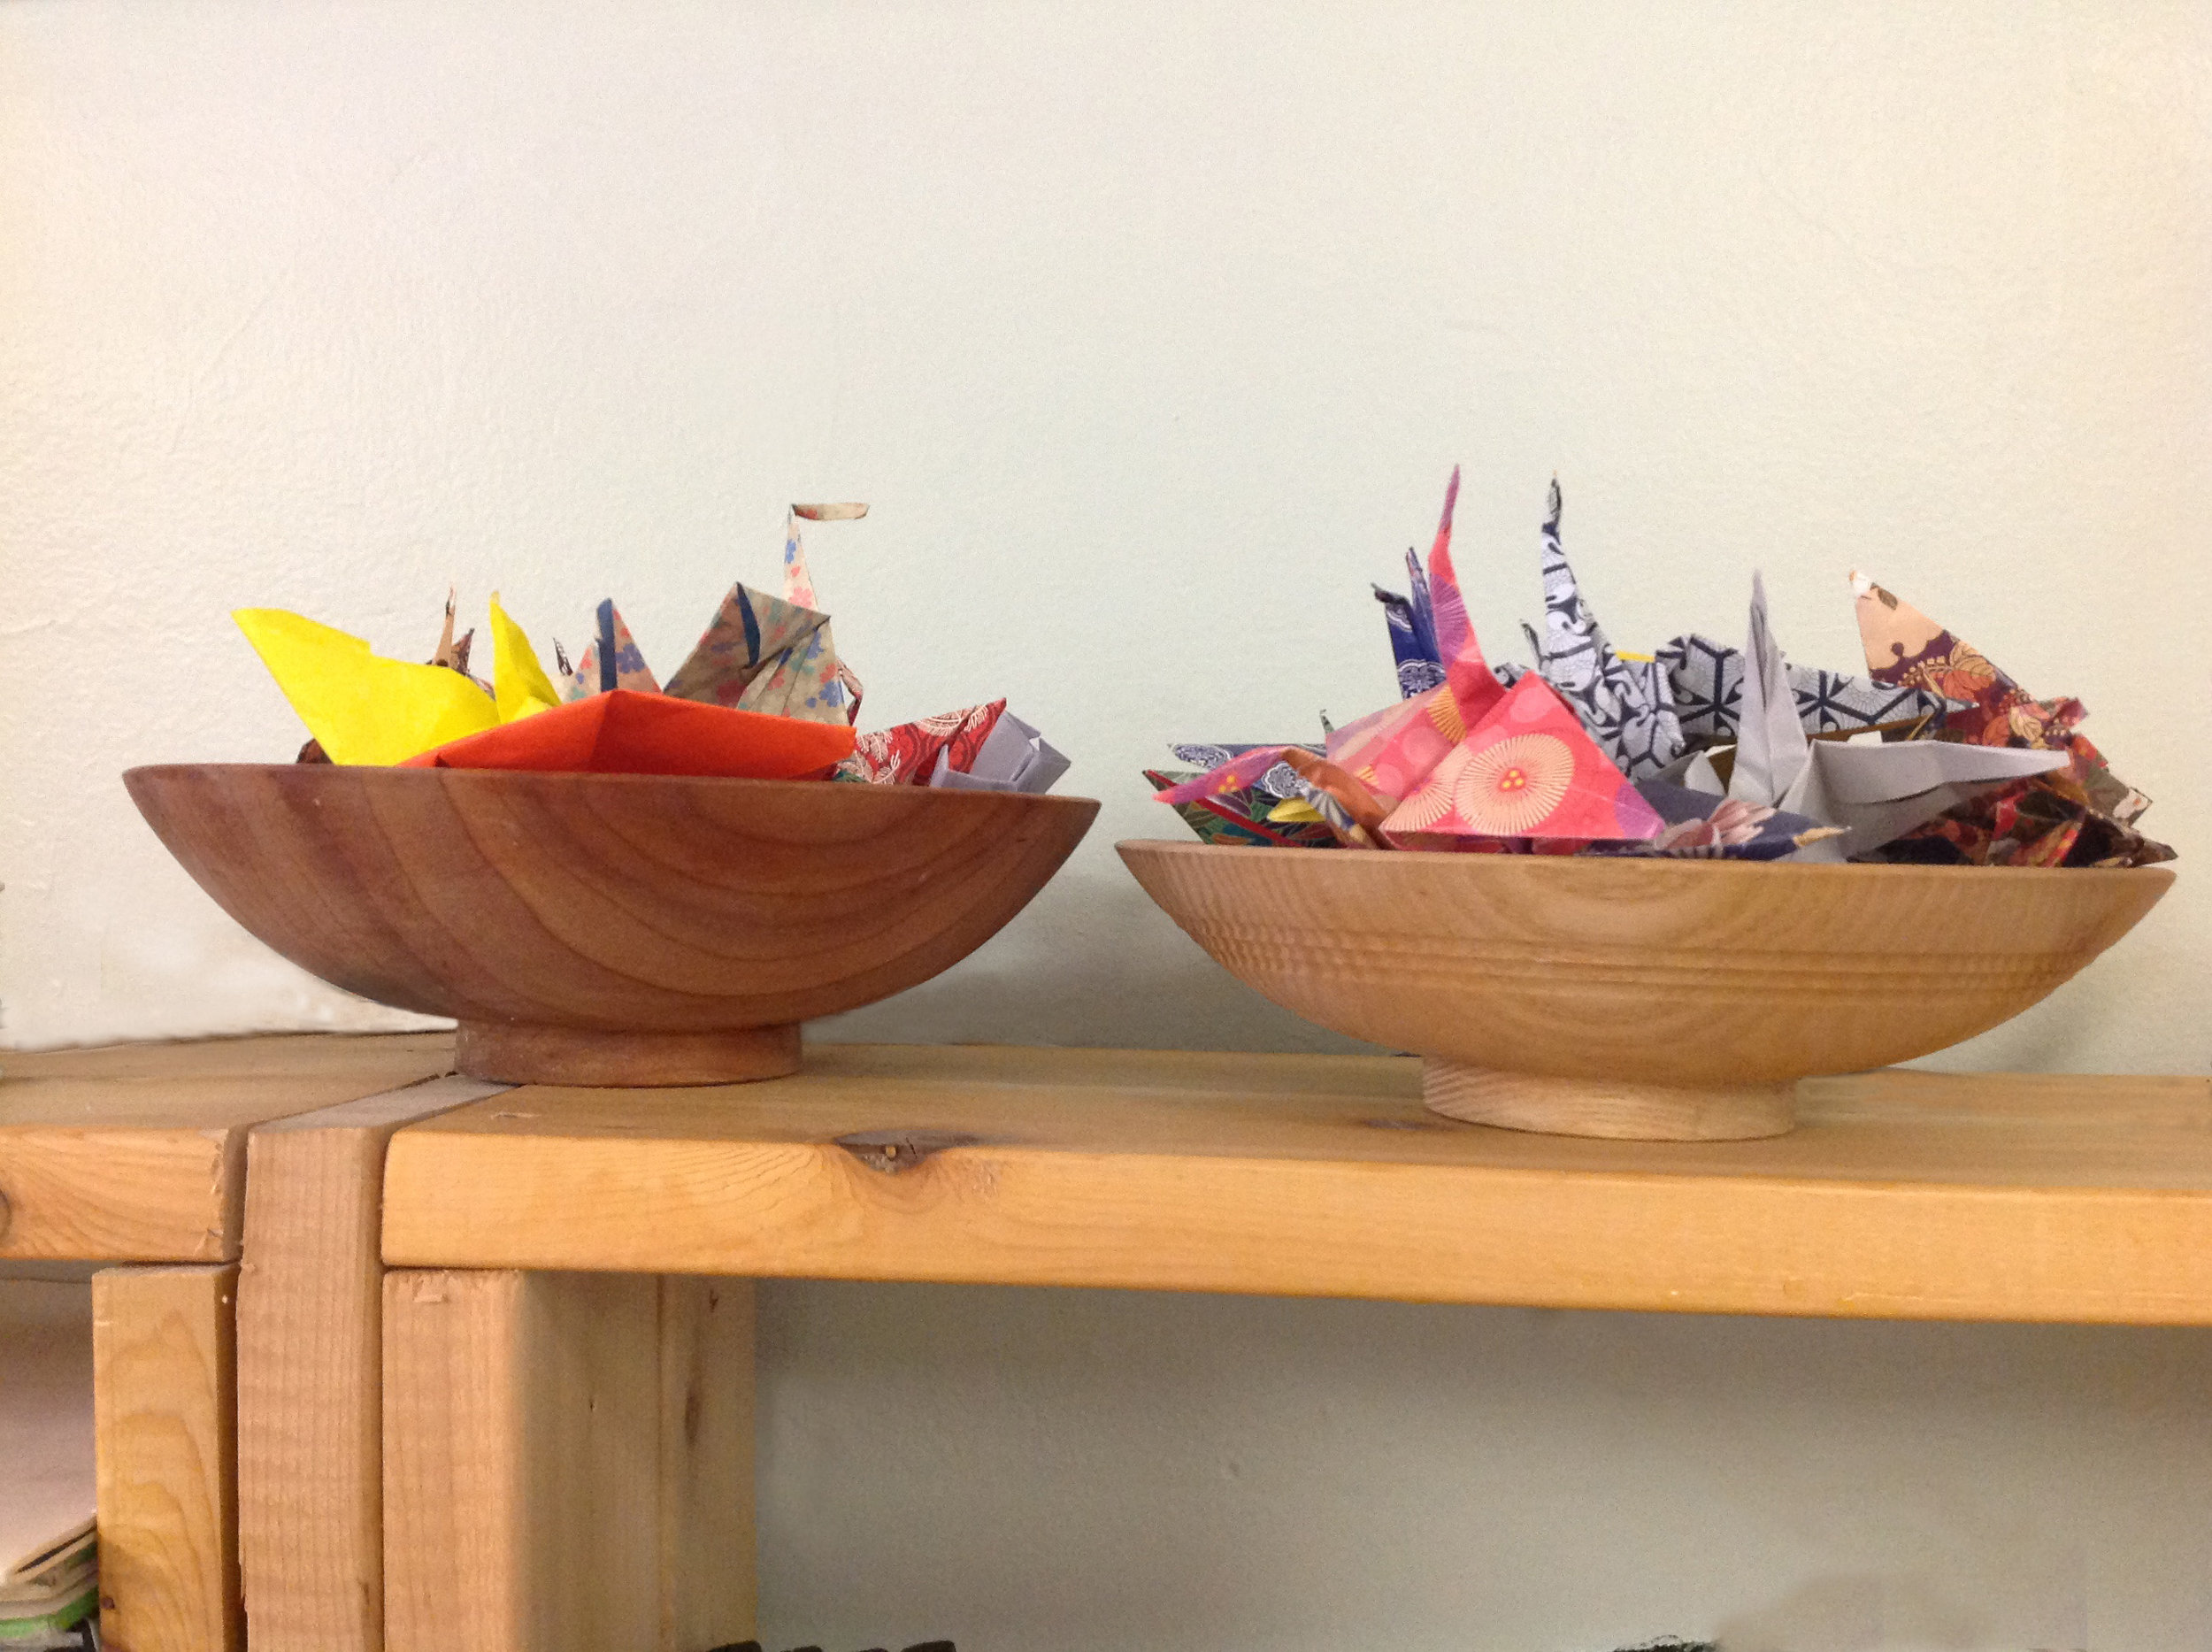 A collection of our lovely cranes...Origami is a "crowd favorite".